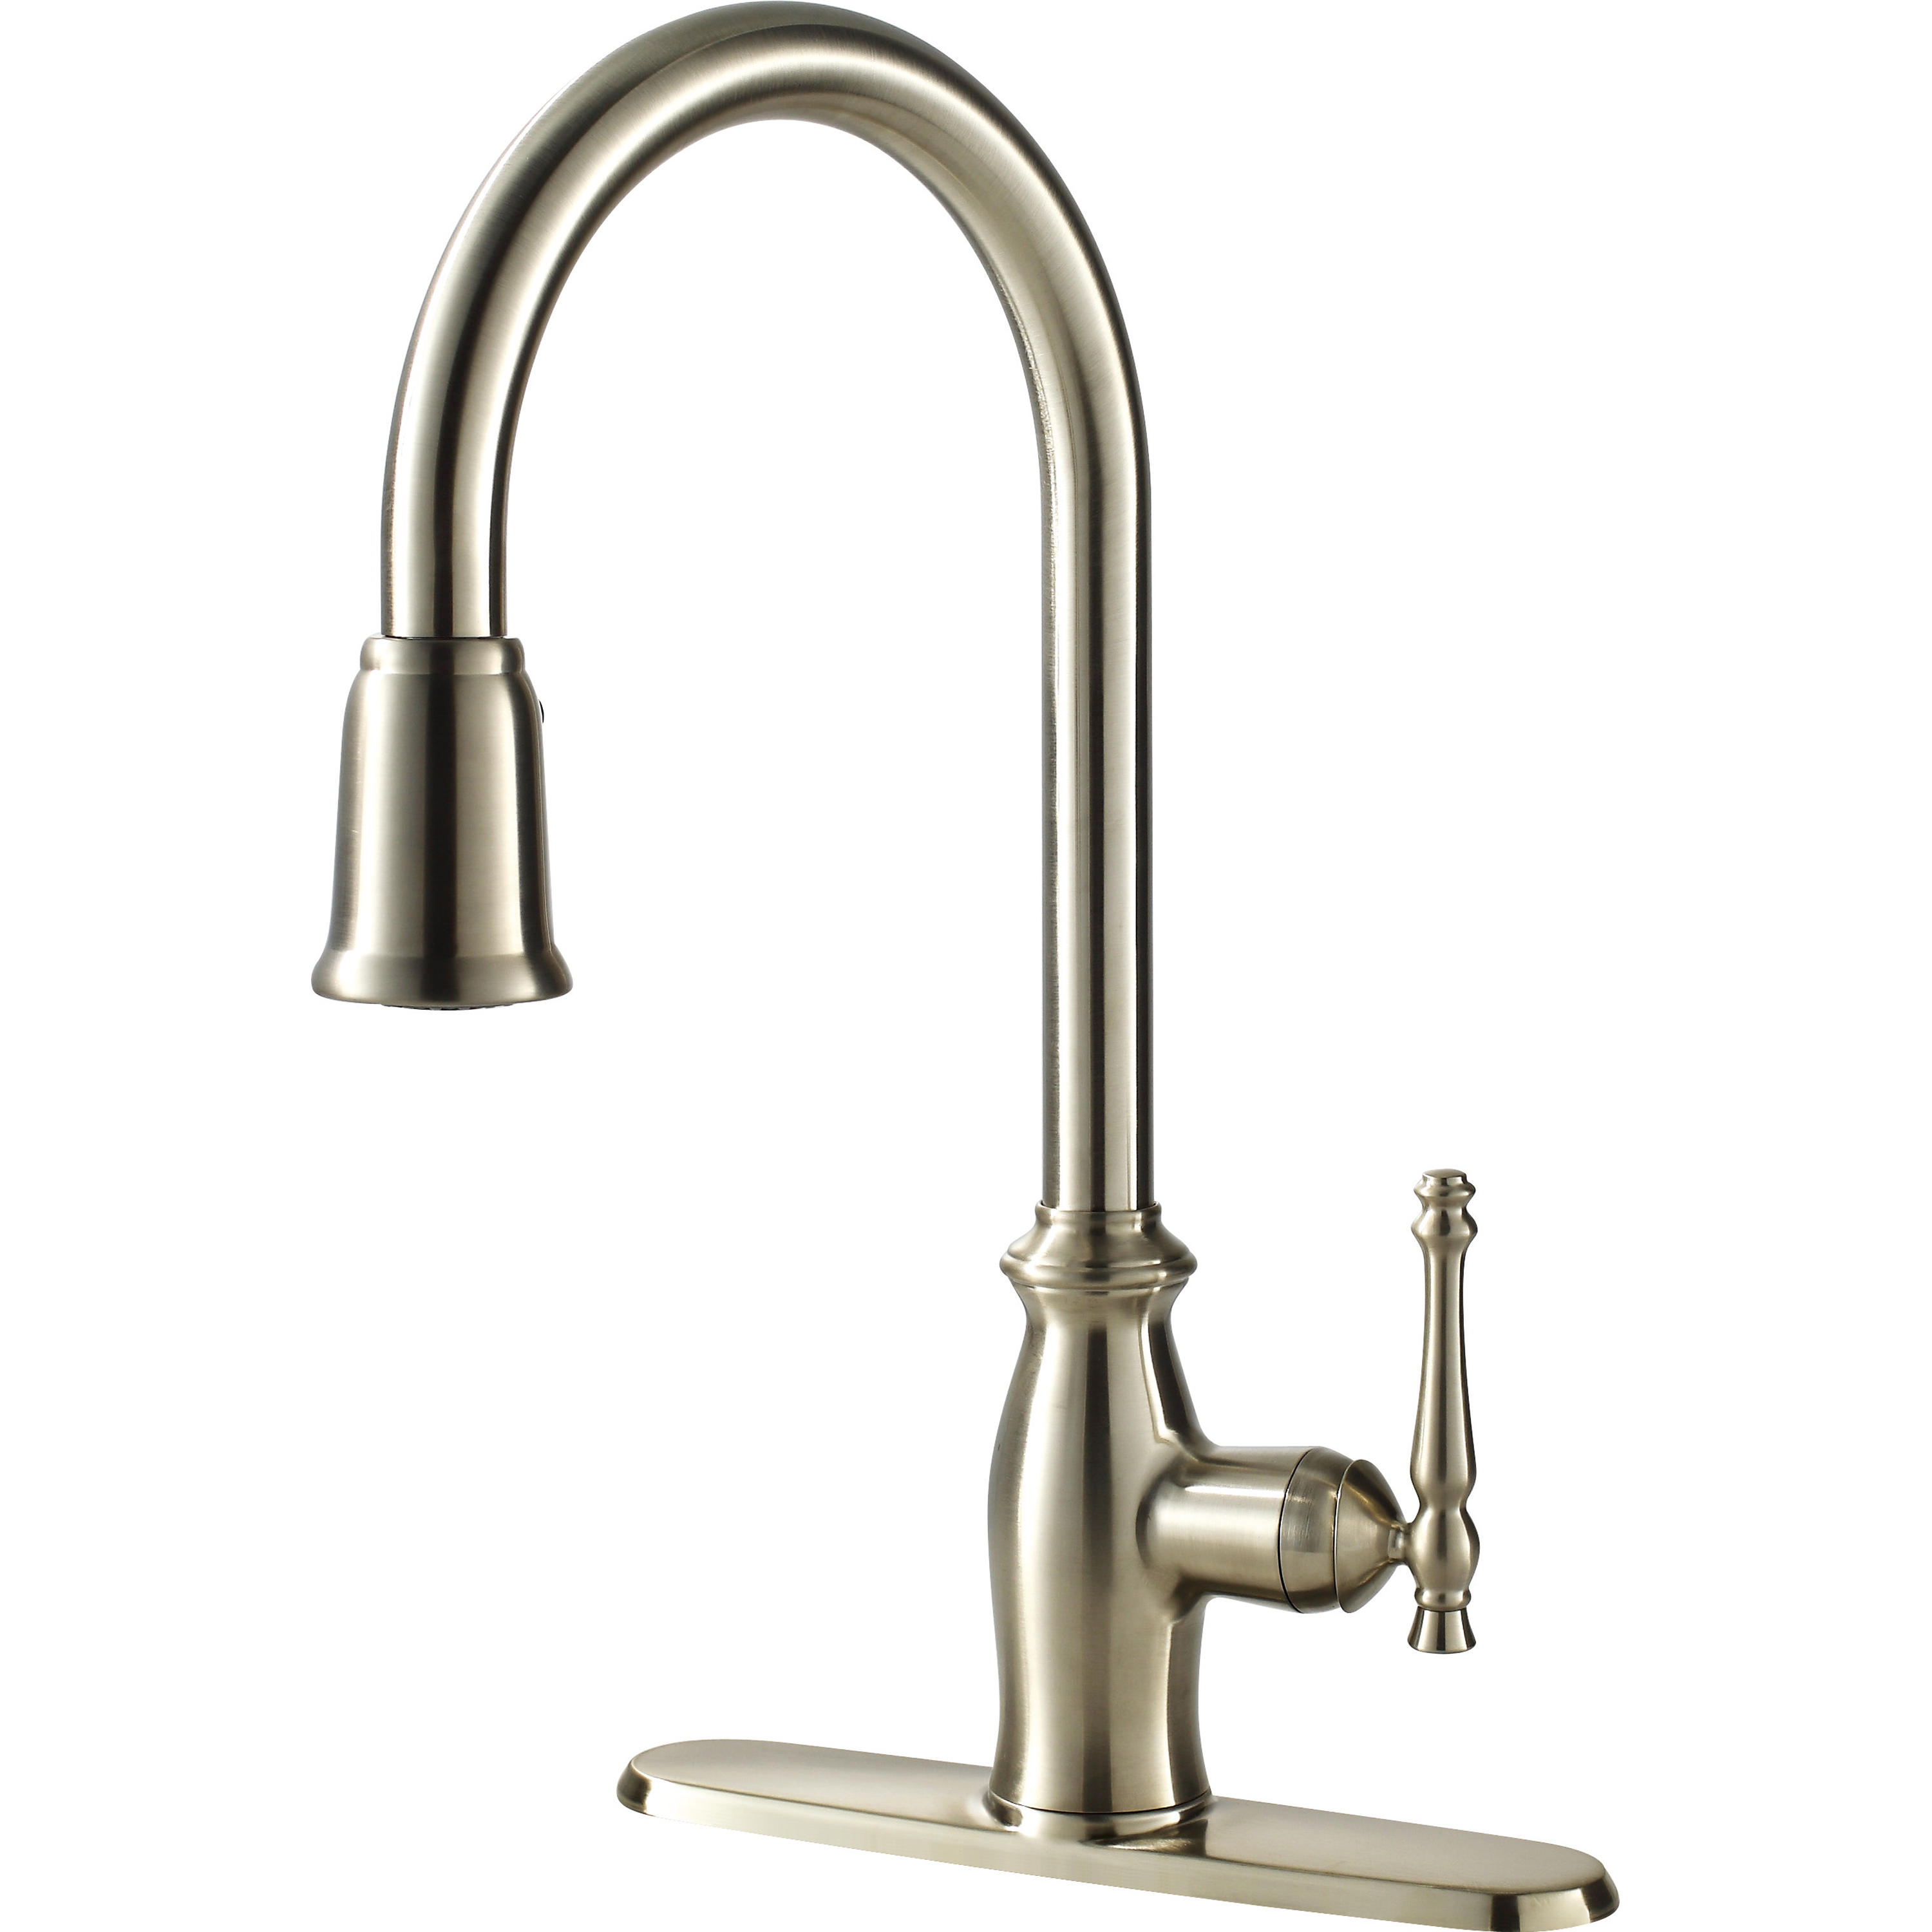 Water Efficient Single Handle Kitchen Faucet With Pull Down Spray